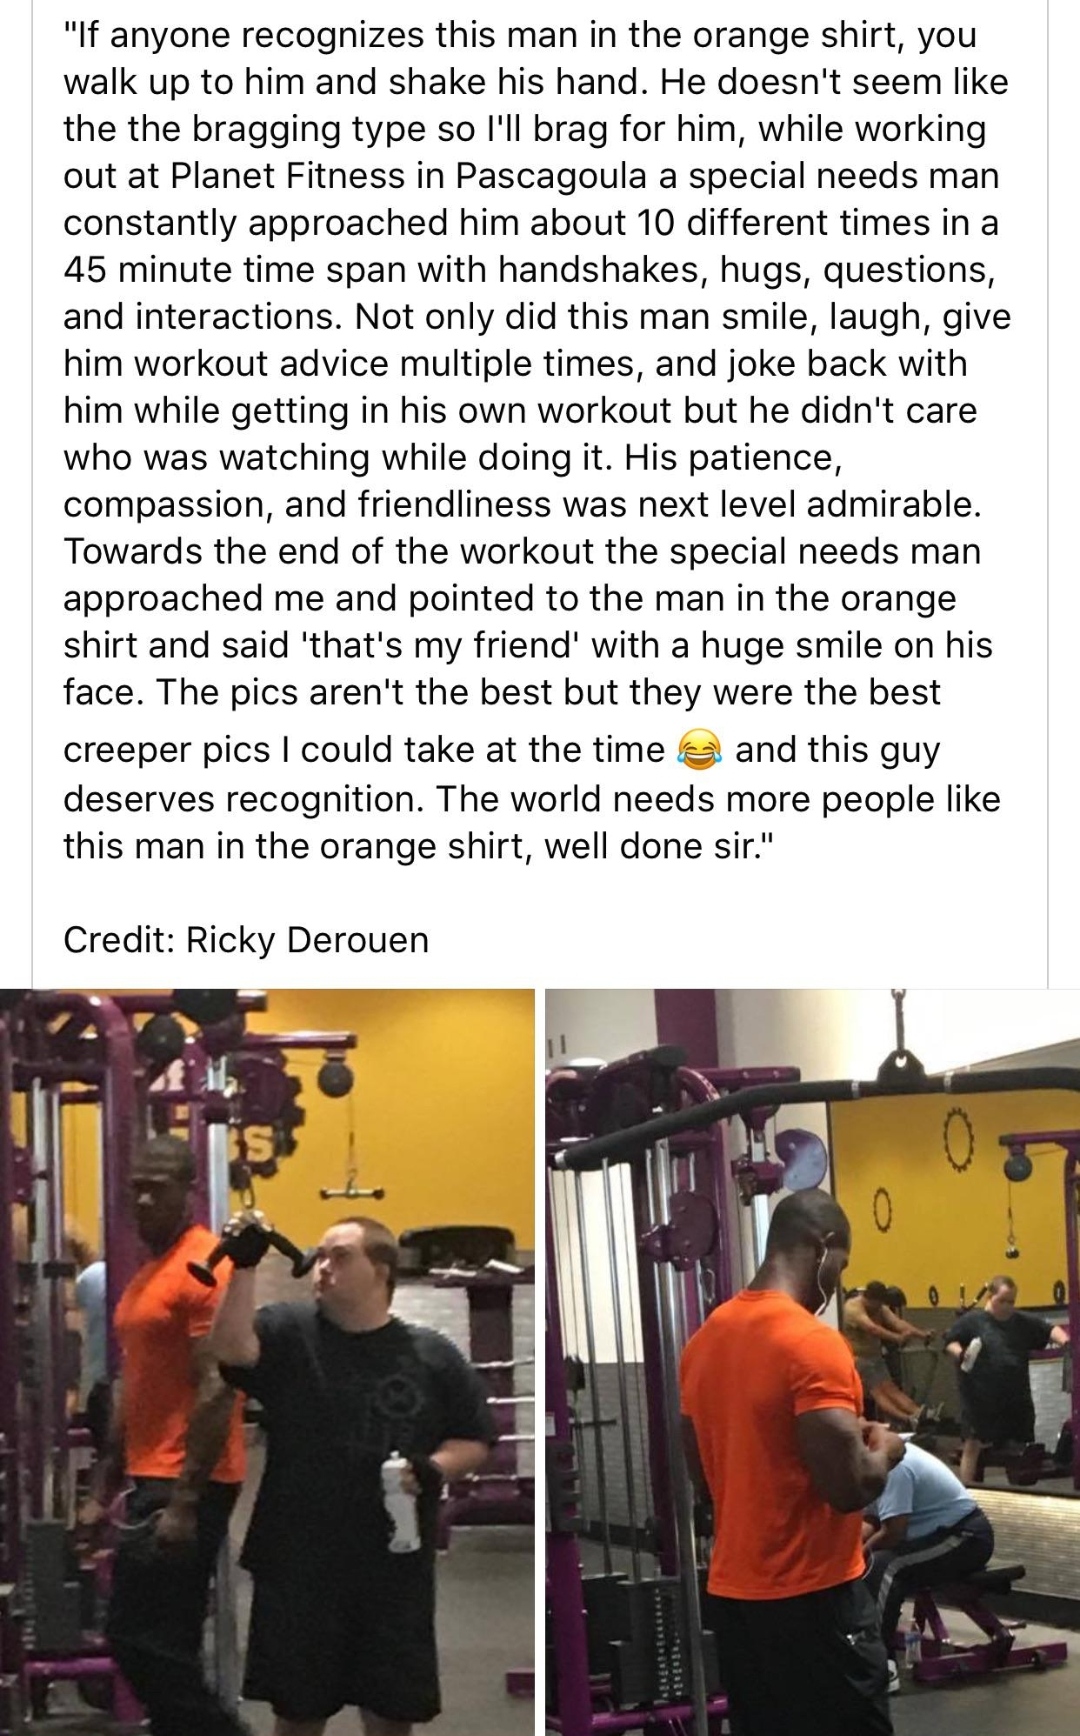 muscle - "If anyone recognizes this man in the orange shirt, you walk up to him and shake his hand. He doesn't seem the the bragging type so I'll brag for him, while working out at Planet Fitness in Pascagoula a special needs man constantly approached him